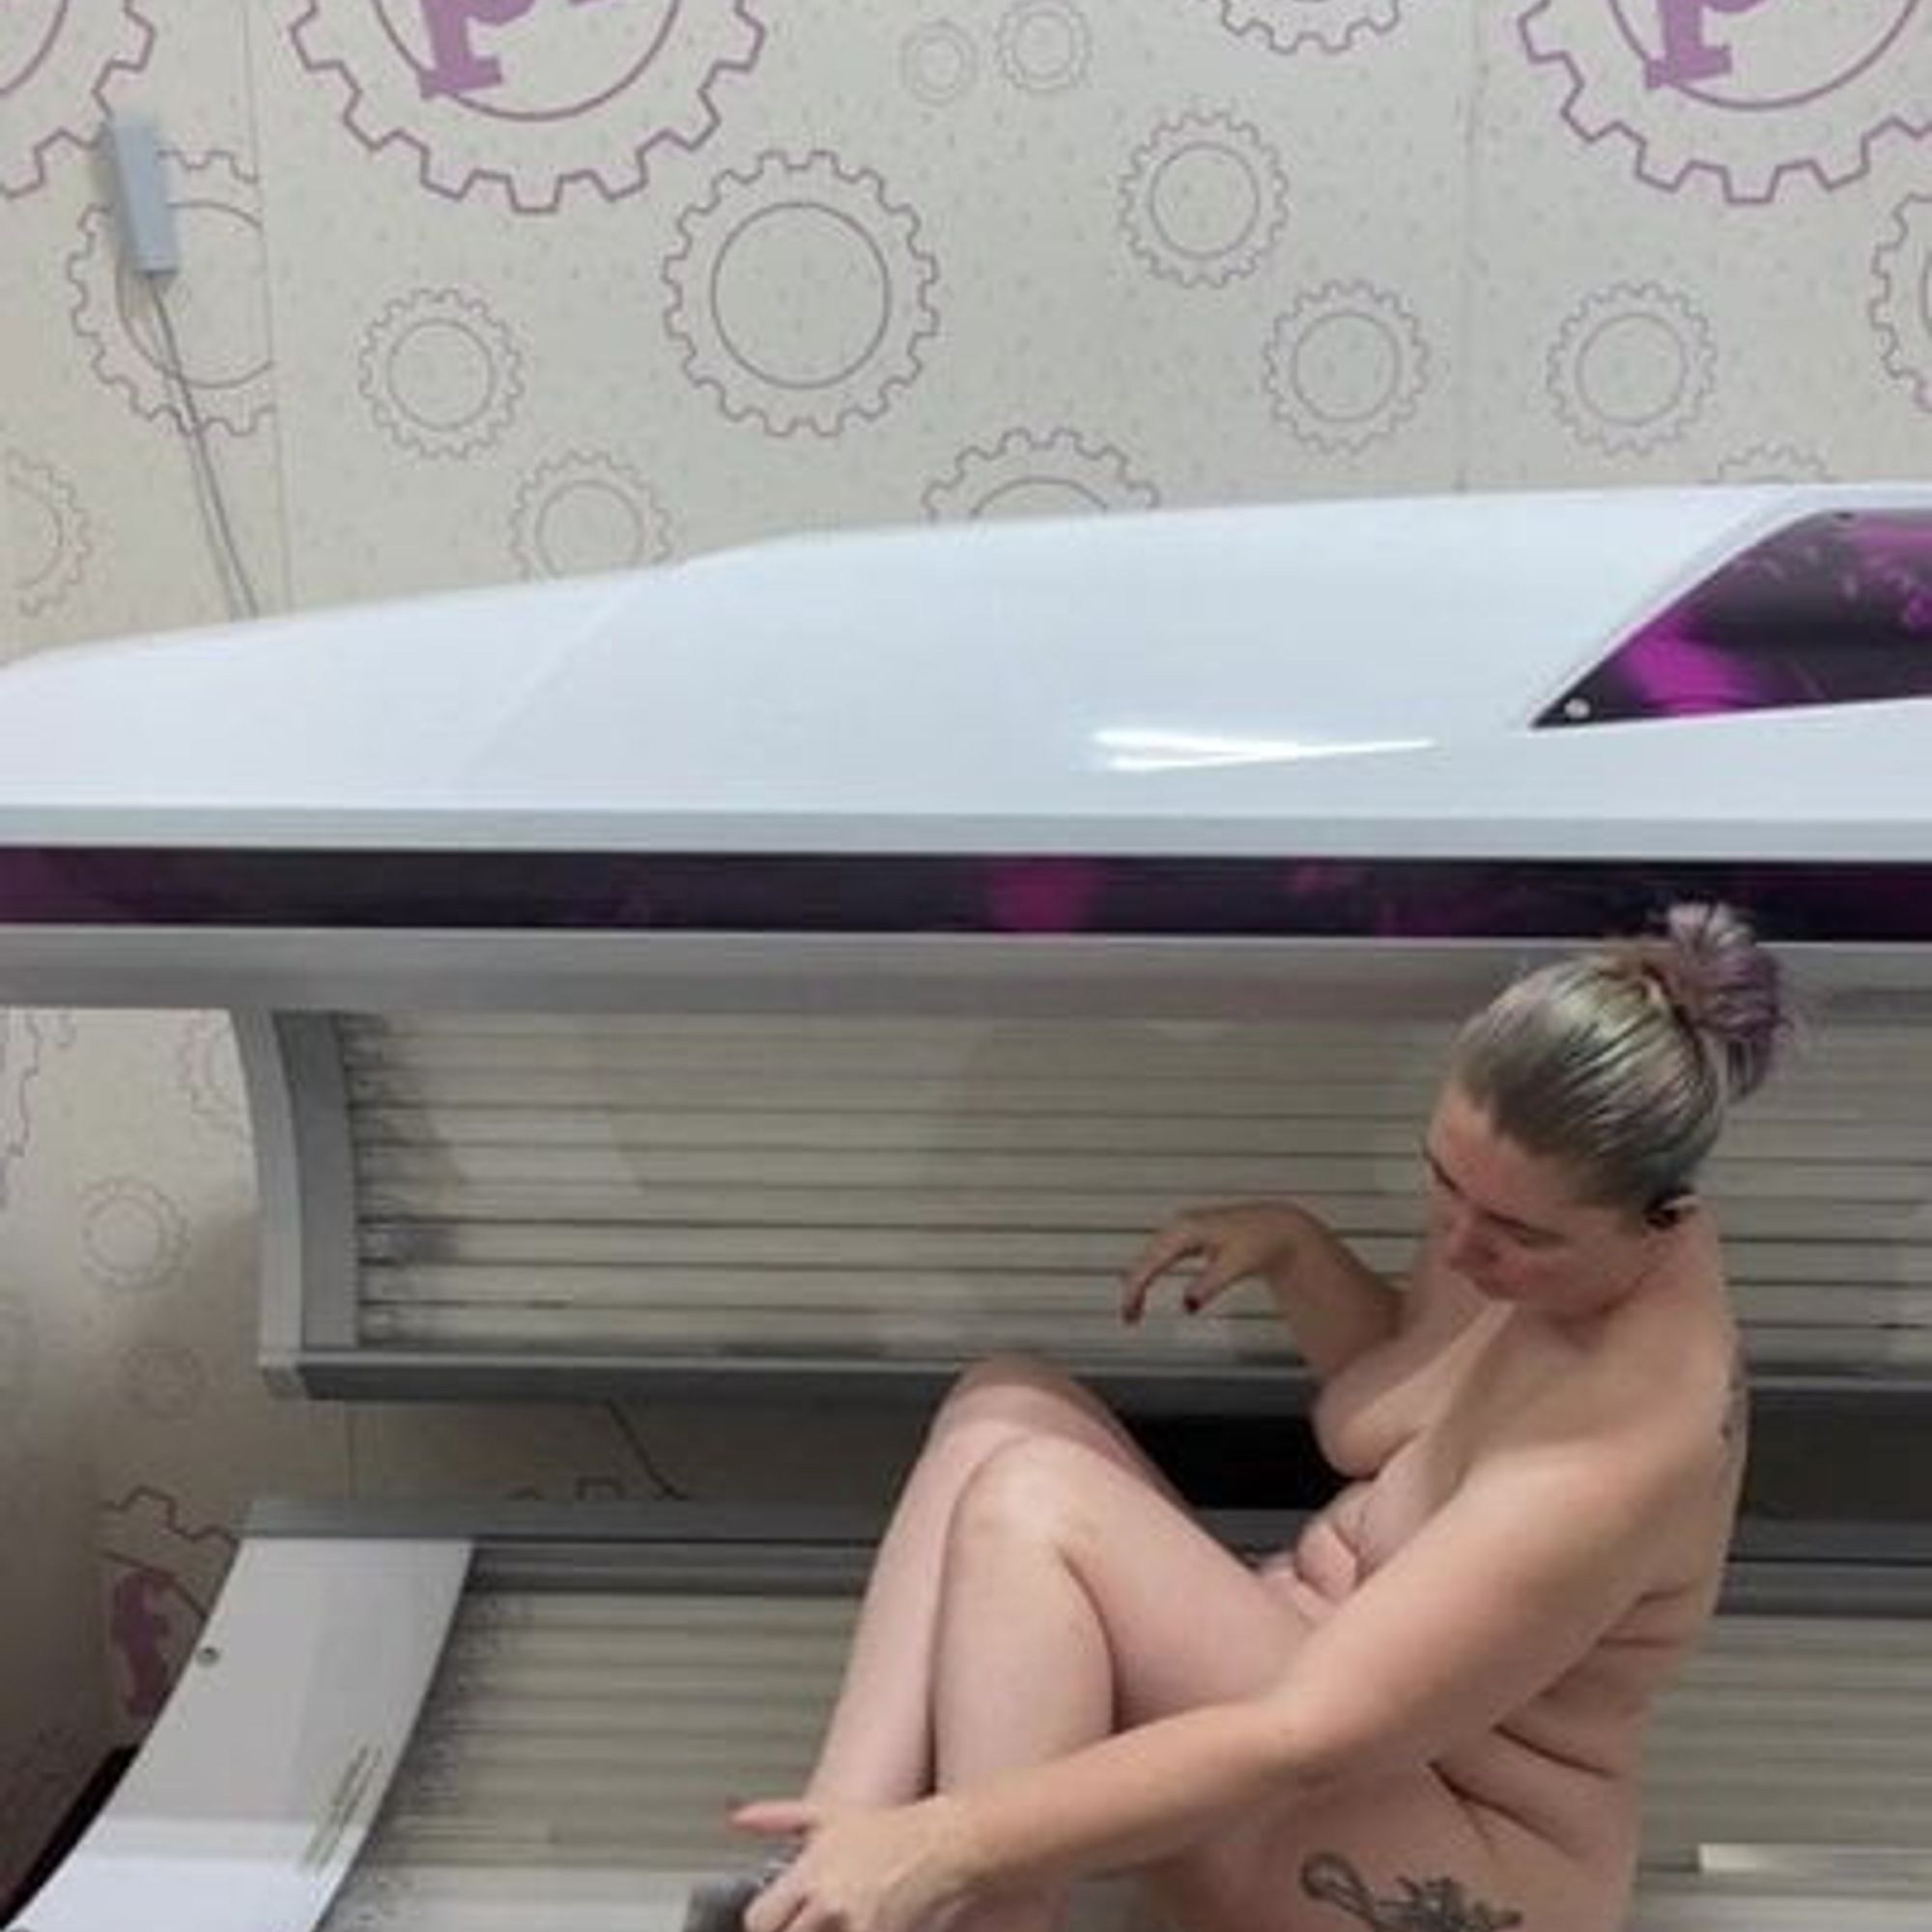 Camera in a tanning bed (81 photos) photo